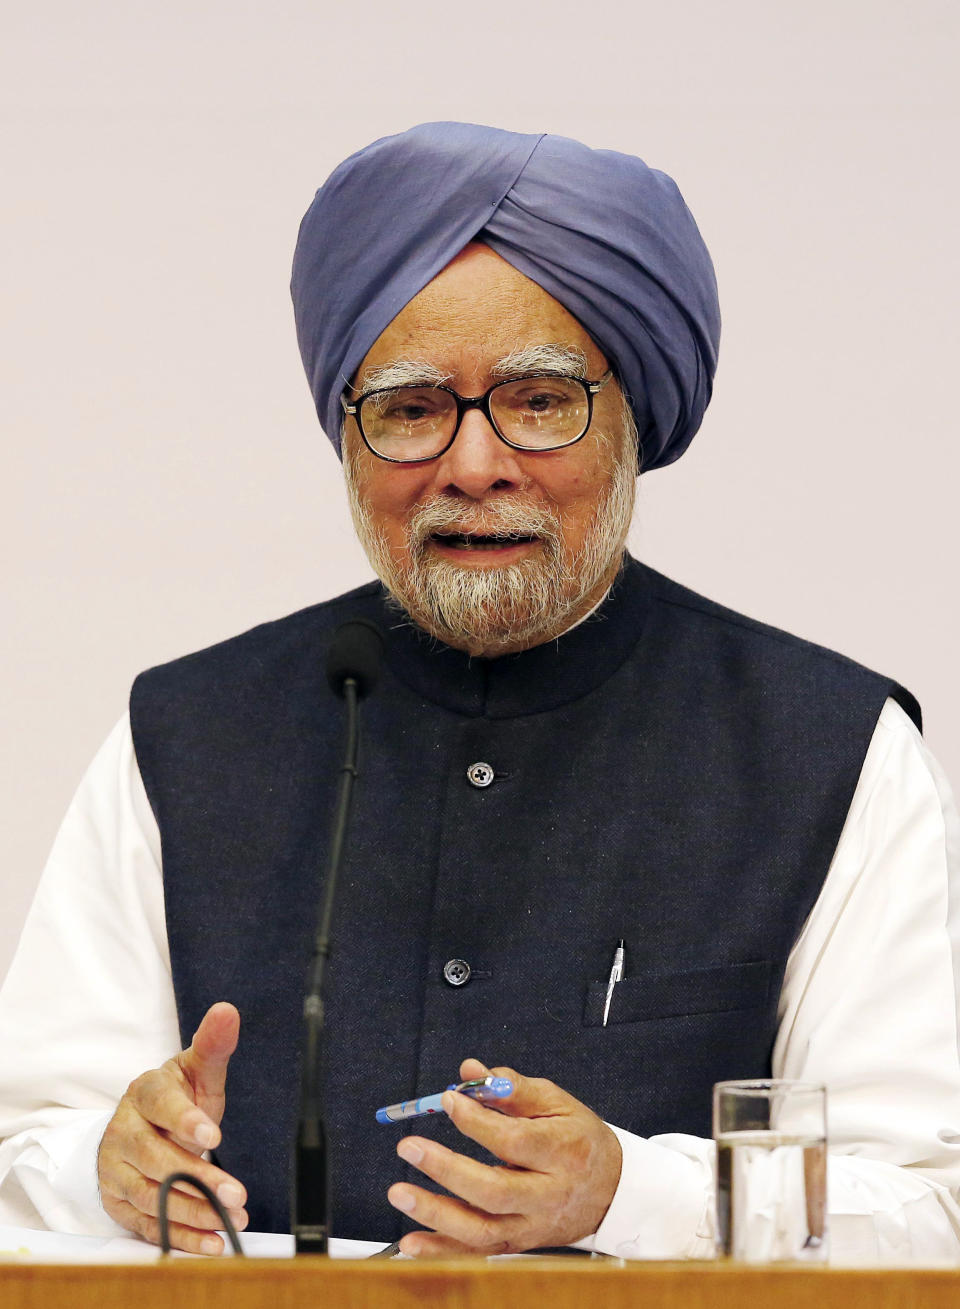 Indian Prime Minster Manmohan Singh addresses a press conference, in New Delhi, India, Friday, Jan. 3, 2014. Prime Minister Singh said Friday he would step aside after 10 years in office, paving the way for Rahul Gandhi to take the reins of the world's biggest democracy if his party stays in power in this year's elections. (AP Photo/Harish Tyagi, Pool)